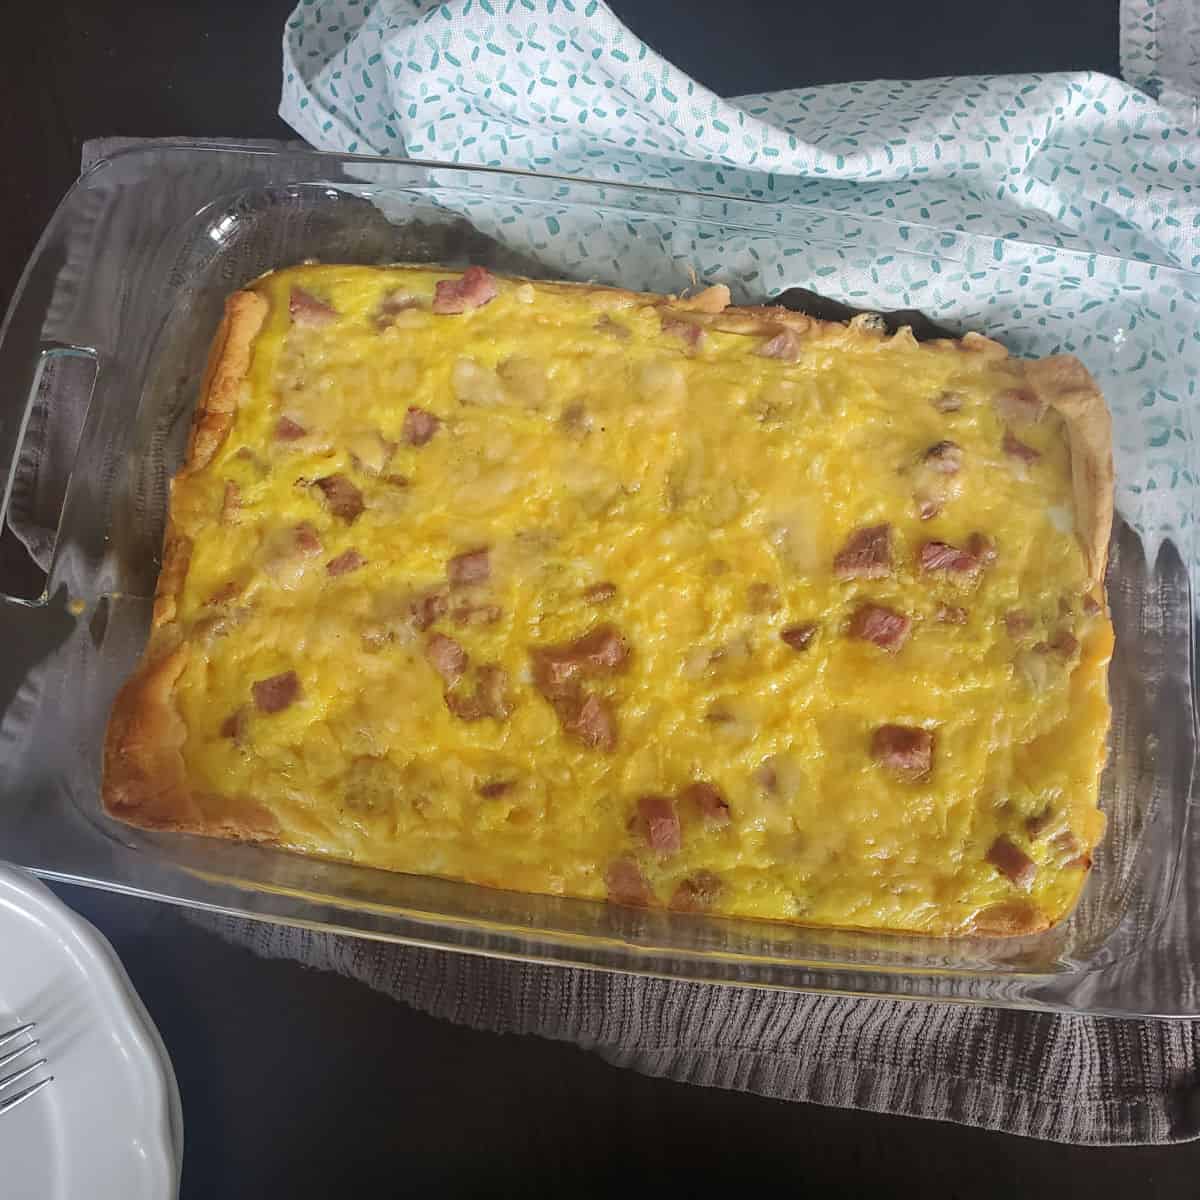 ham, cheese, and egg baked on a crescent roll in a glass casserole dish